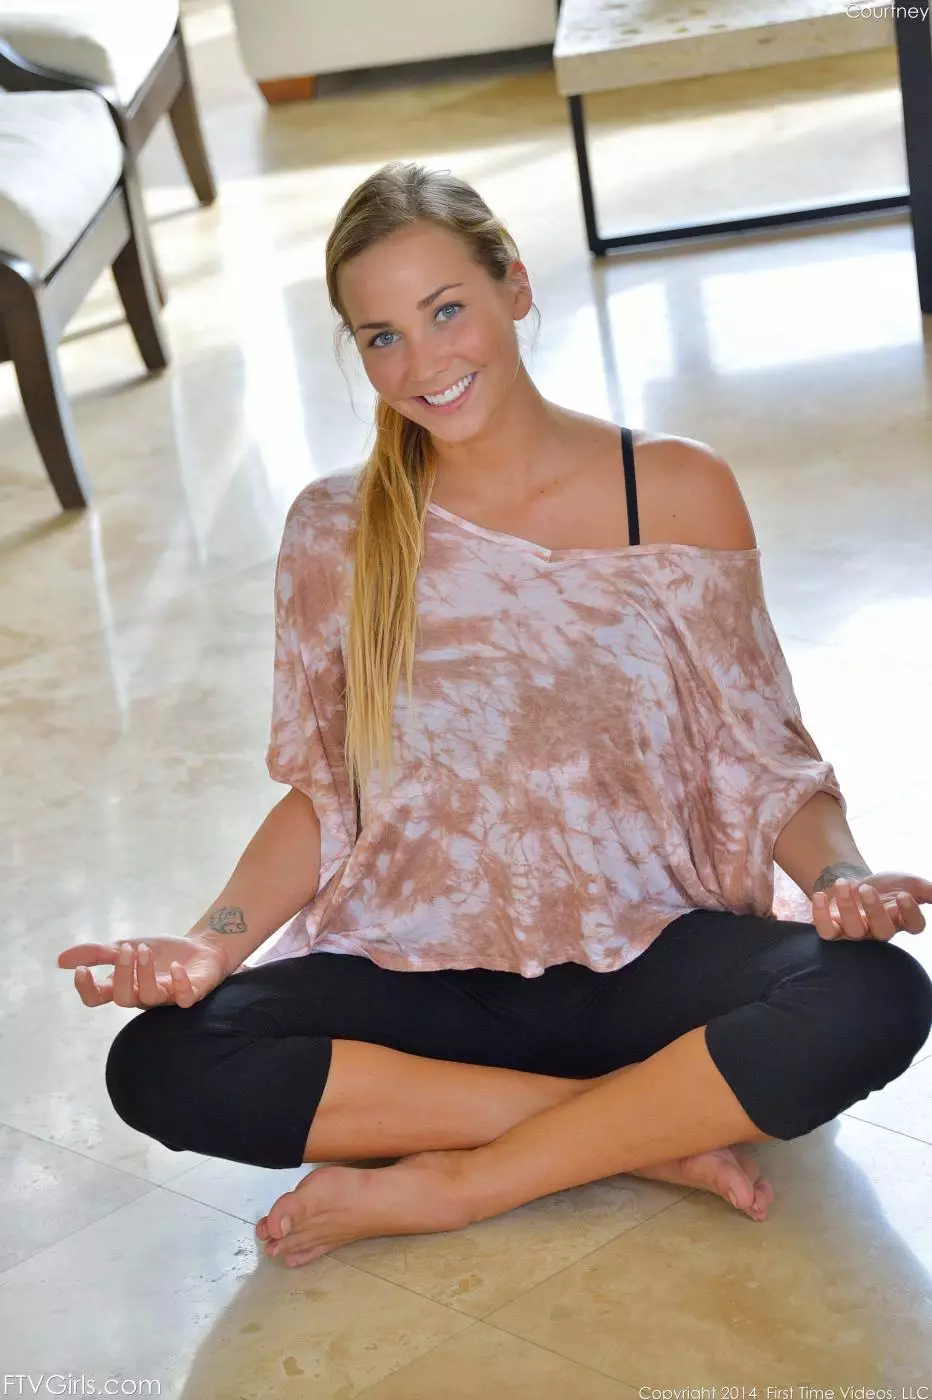 Hot goldilocks Courtney Dillon does yoga asanas baring her charms in between